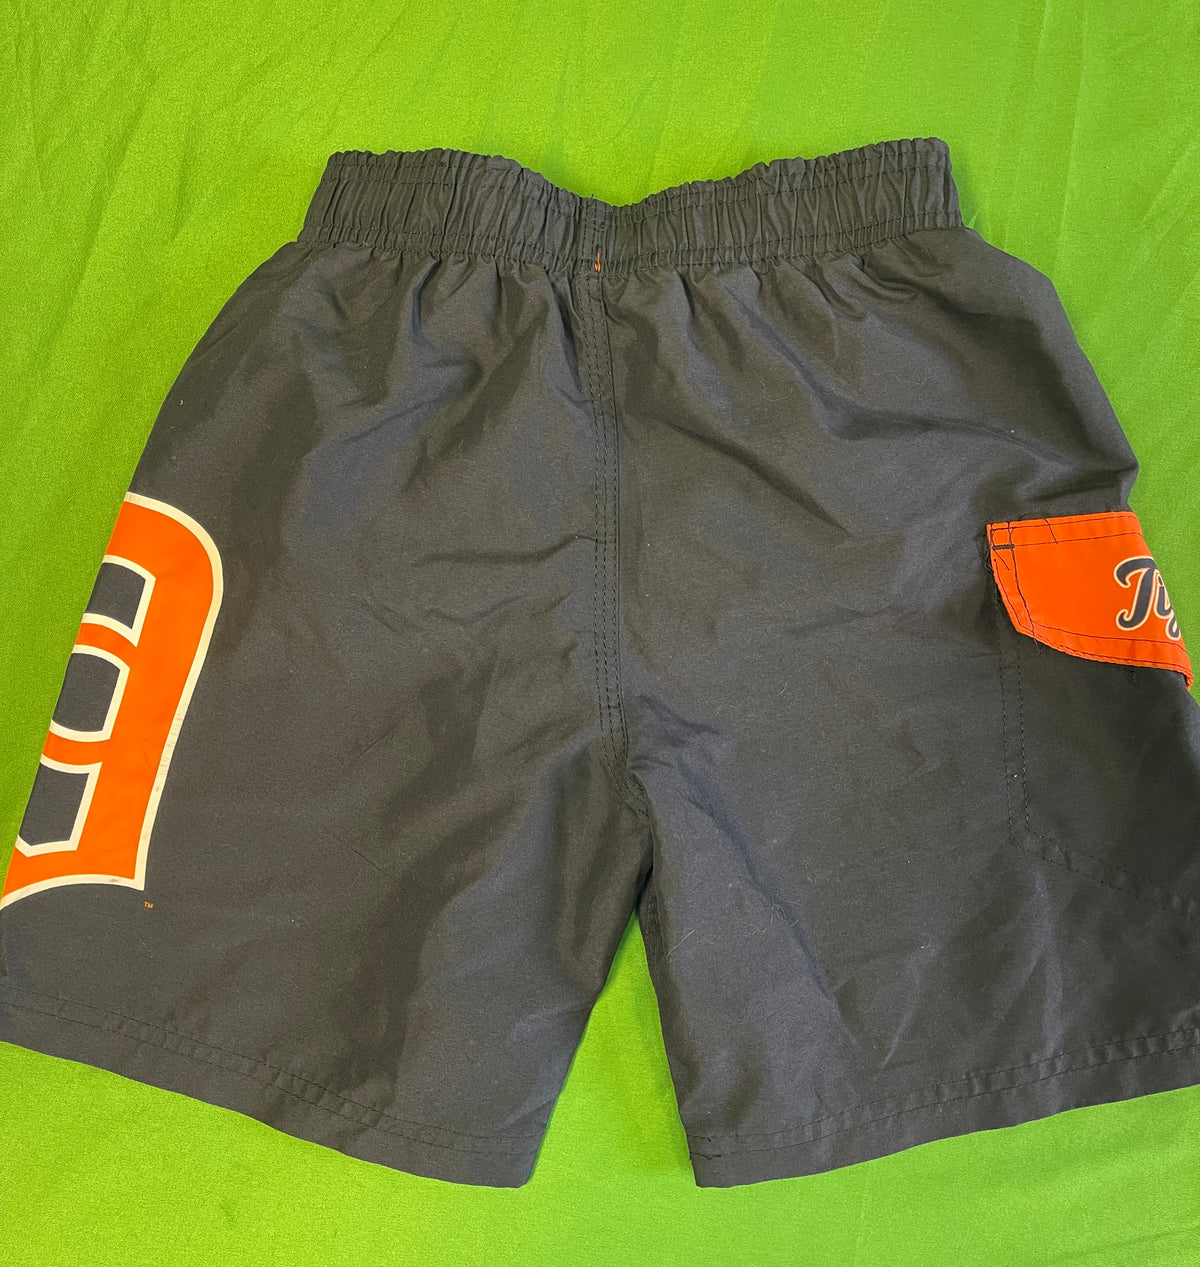 MLB Detroit Tigers Swimming Trunks/Shorts Youth Small 6-8